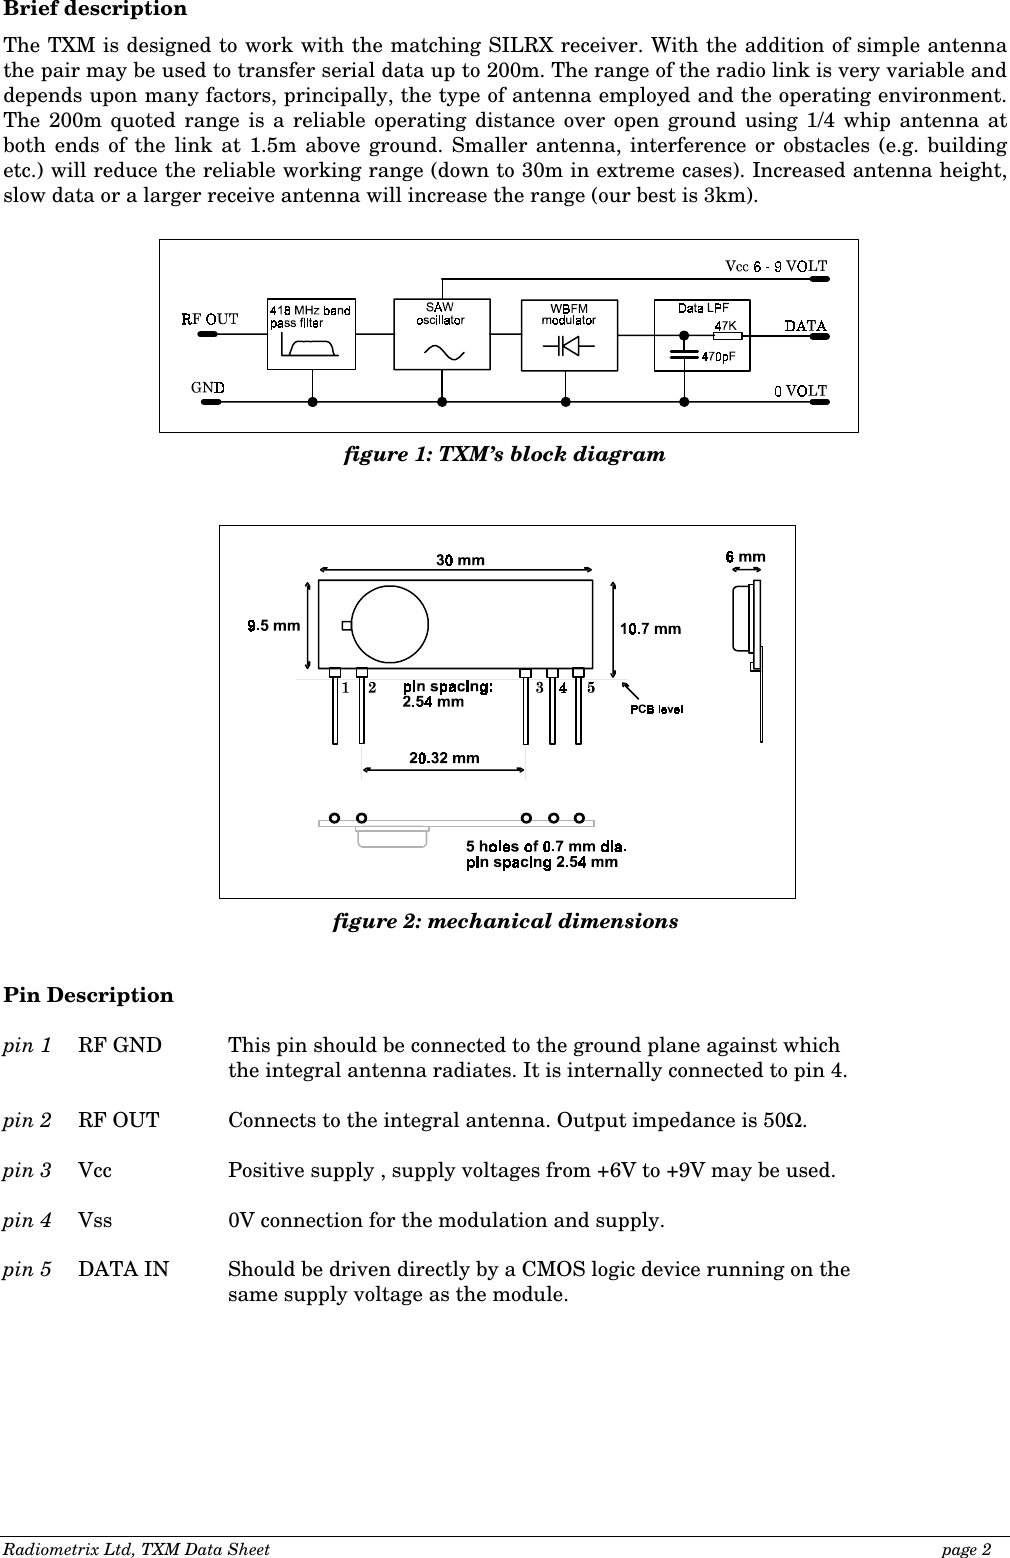 Radiometrix Ltd, TXM Data Sheet                                                                                              page 2 Brief description The TXM is designed to work with the matching SILRX receiver. With the addition of simple antenna the pair may be used to transfer serial data up to 200m. The range of the radio link is very variable and depends upon many factors, principally, the type of antenna employed and the operating environment. The 200m quoted range is a reliable operating distance over open ground using 1/4 whip antenna at both ends of the link at 1.5m above ground. Smaller antenna, interference or obstacles (e.g. building etc.) will reduce the reliable working range (down to 30m in extreme cases). Increased antenna height, slow data or a larger receive antenna will increase the range (our best is 3km).                                 Pin Description  pin 1  RF GND  This pin should be connected to the ground plane against which        the integral antenna radiates. It is internally connected to pin 4.  pin 2  RF OUT  Connects to the integral antenna. Output impedance is 50Ω.  pin 3  Vcc    Positive supply , supply voltages from +6V to +9V may be used.  pin 4  Vss    0V connection for the modulation and supply.  pin 5  DATA IN  Should be driven directly by a CMOS logic device running on the  same supply voltage as the module.  figure 1: TXM’s block diagram figure 2: mechanical dimensions  